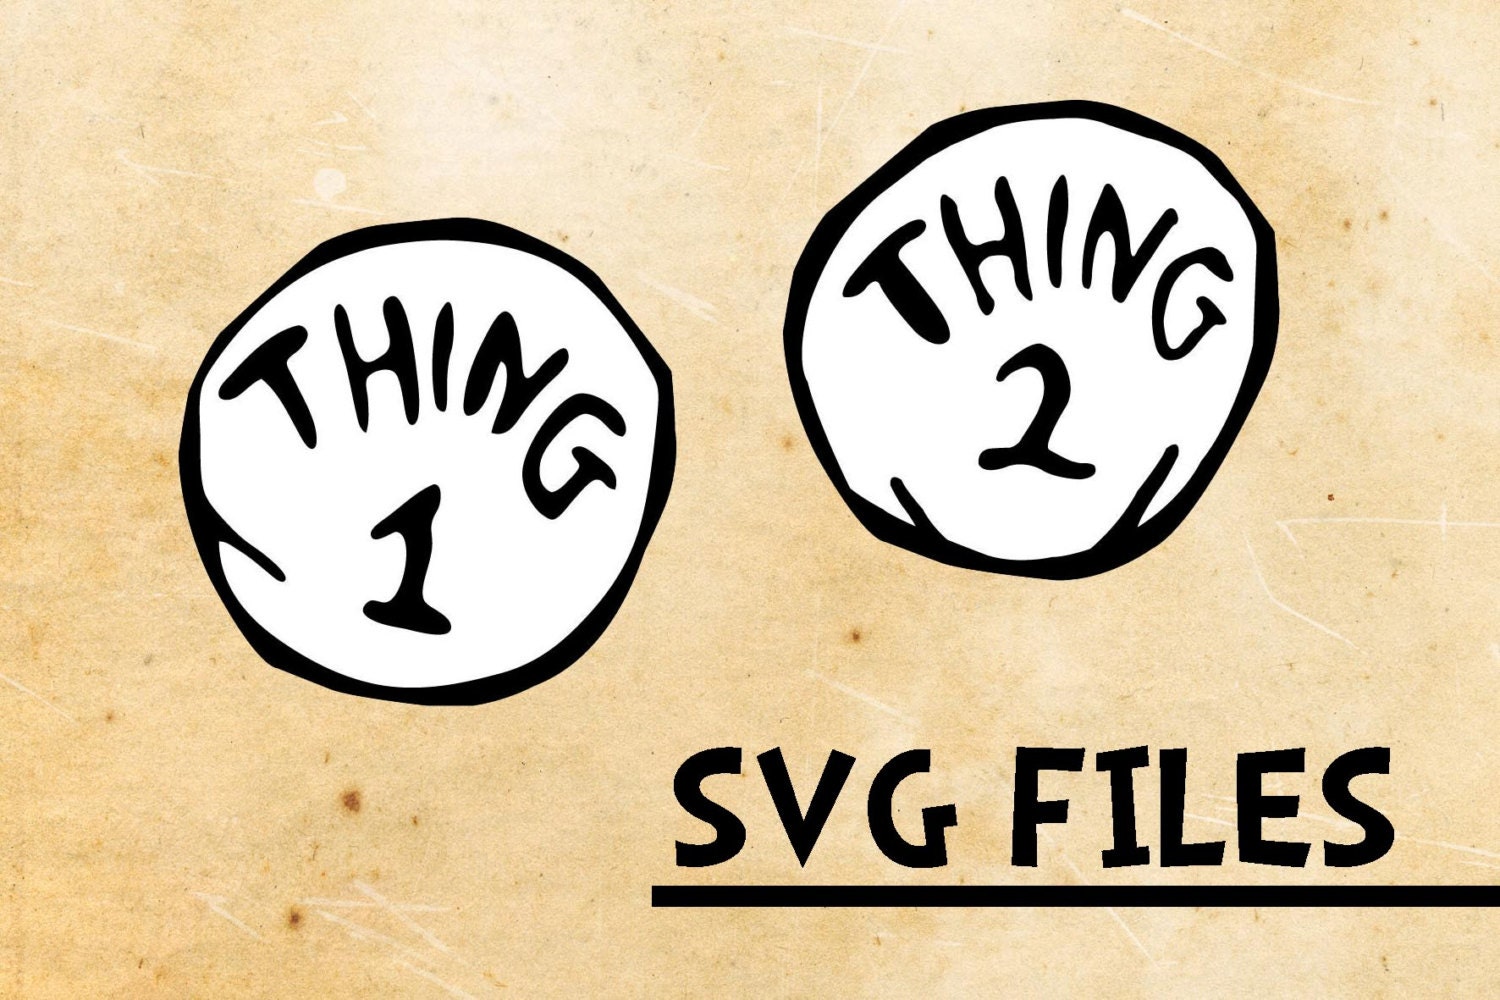 Thing 1 Svg Thing 2 Svg Dr Seuss Svg Files Cricut Cut | Images and ...